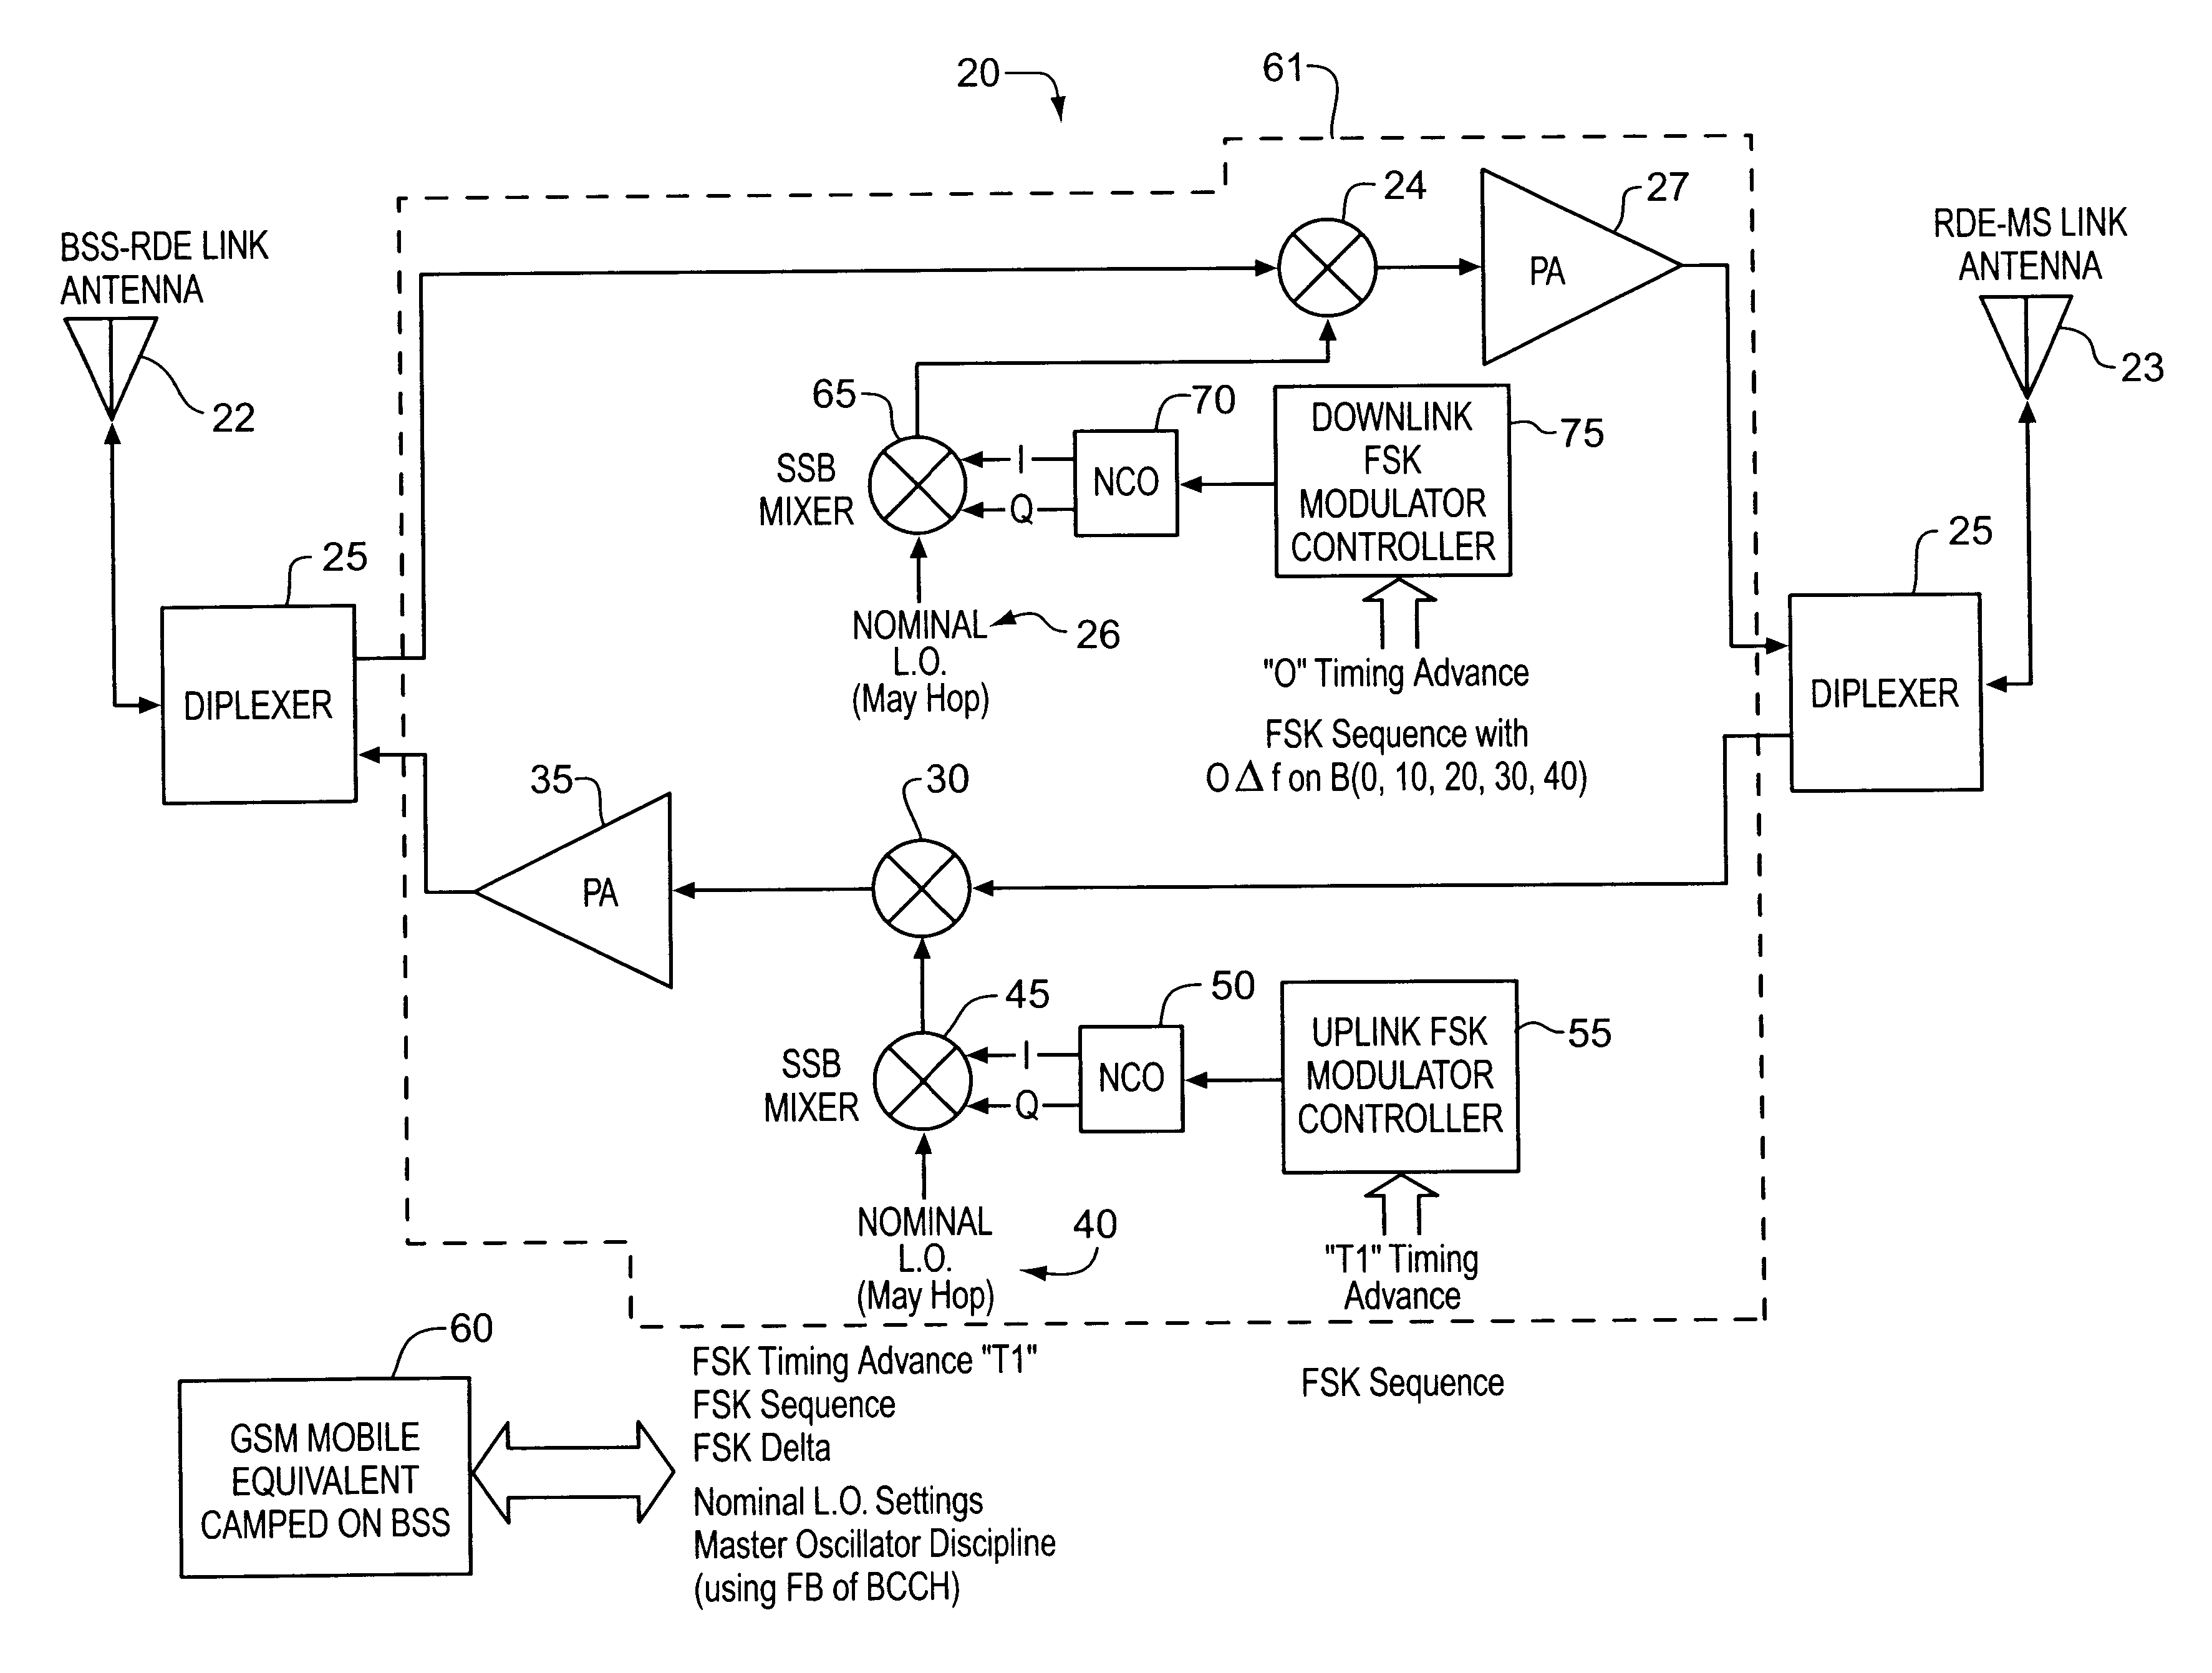 RF signal repeater in mobile communications systems